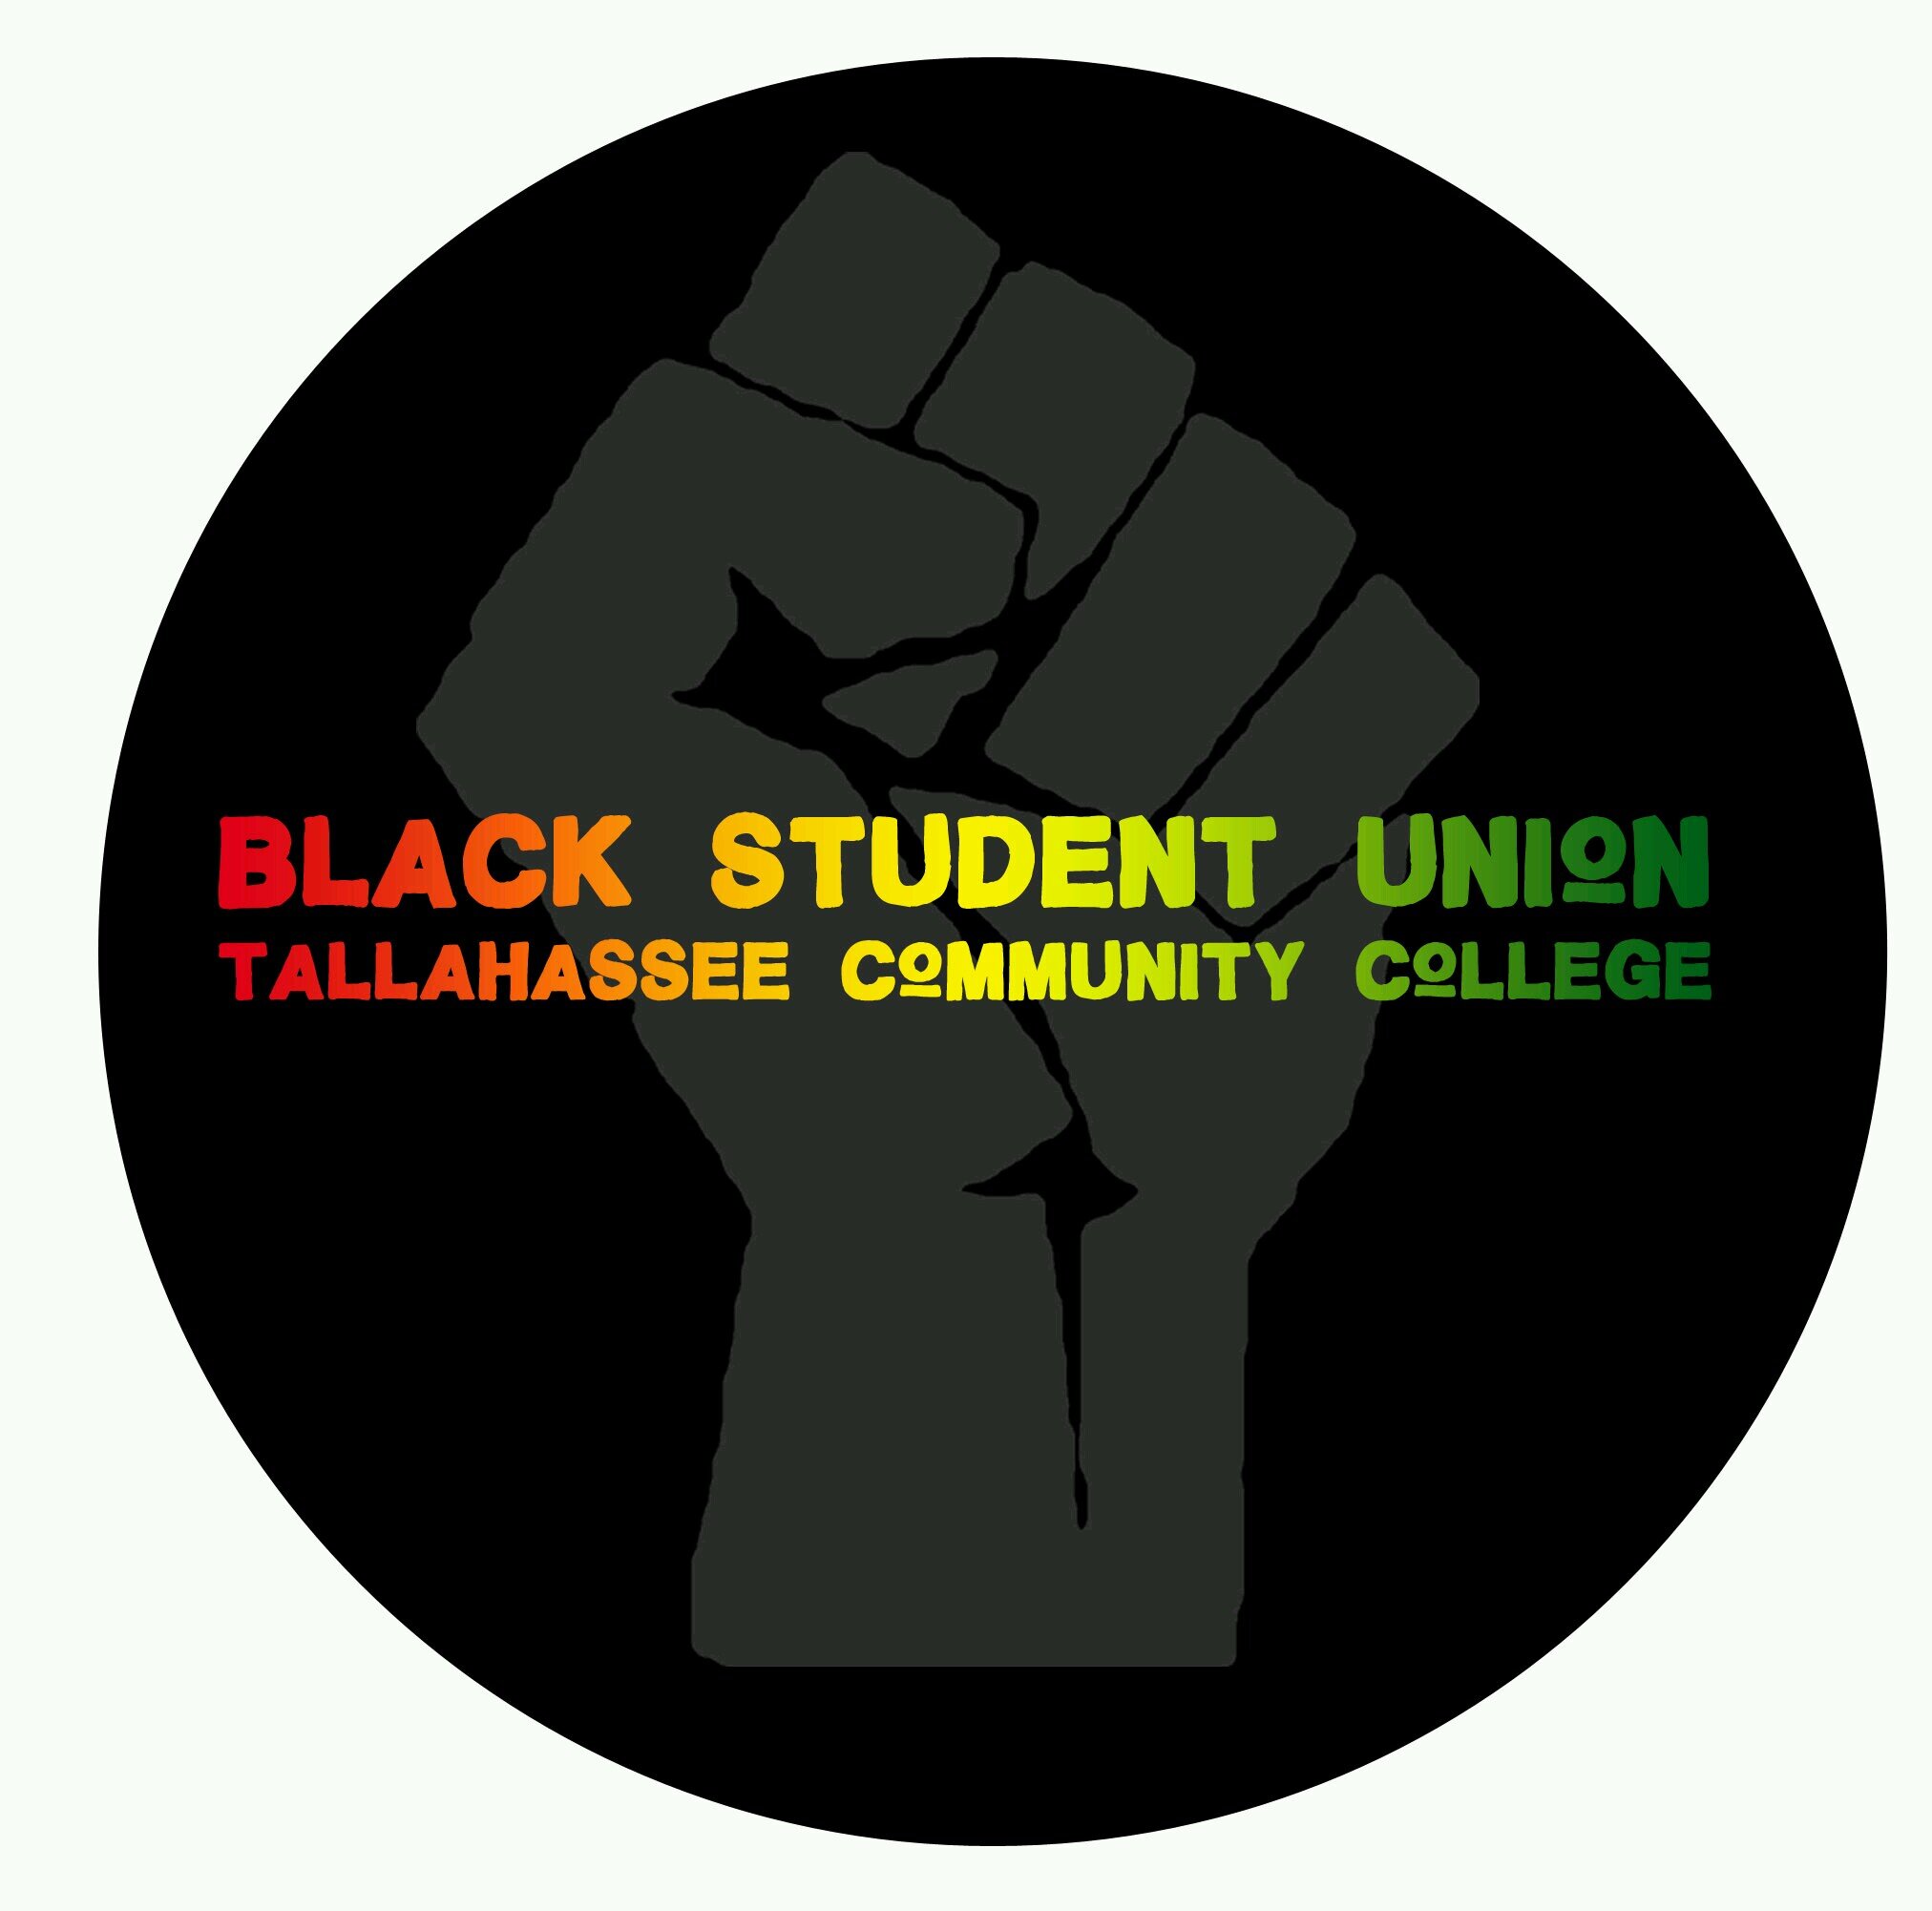 The Black Student Union of Tallahassee Community College promotes unity, service and success throughout campus and in the community.